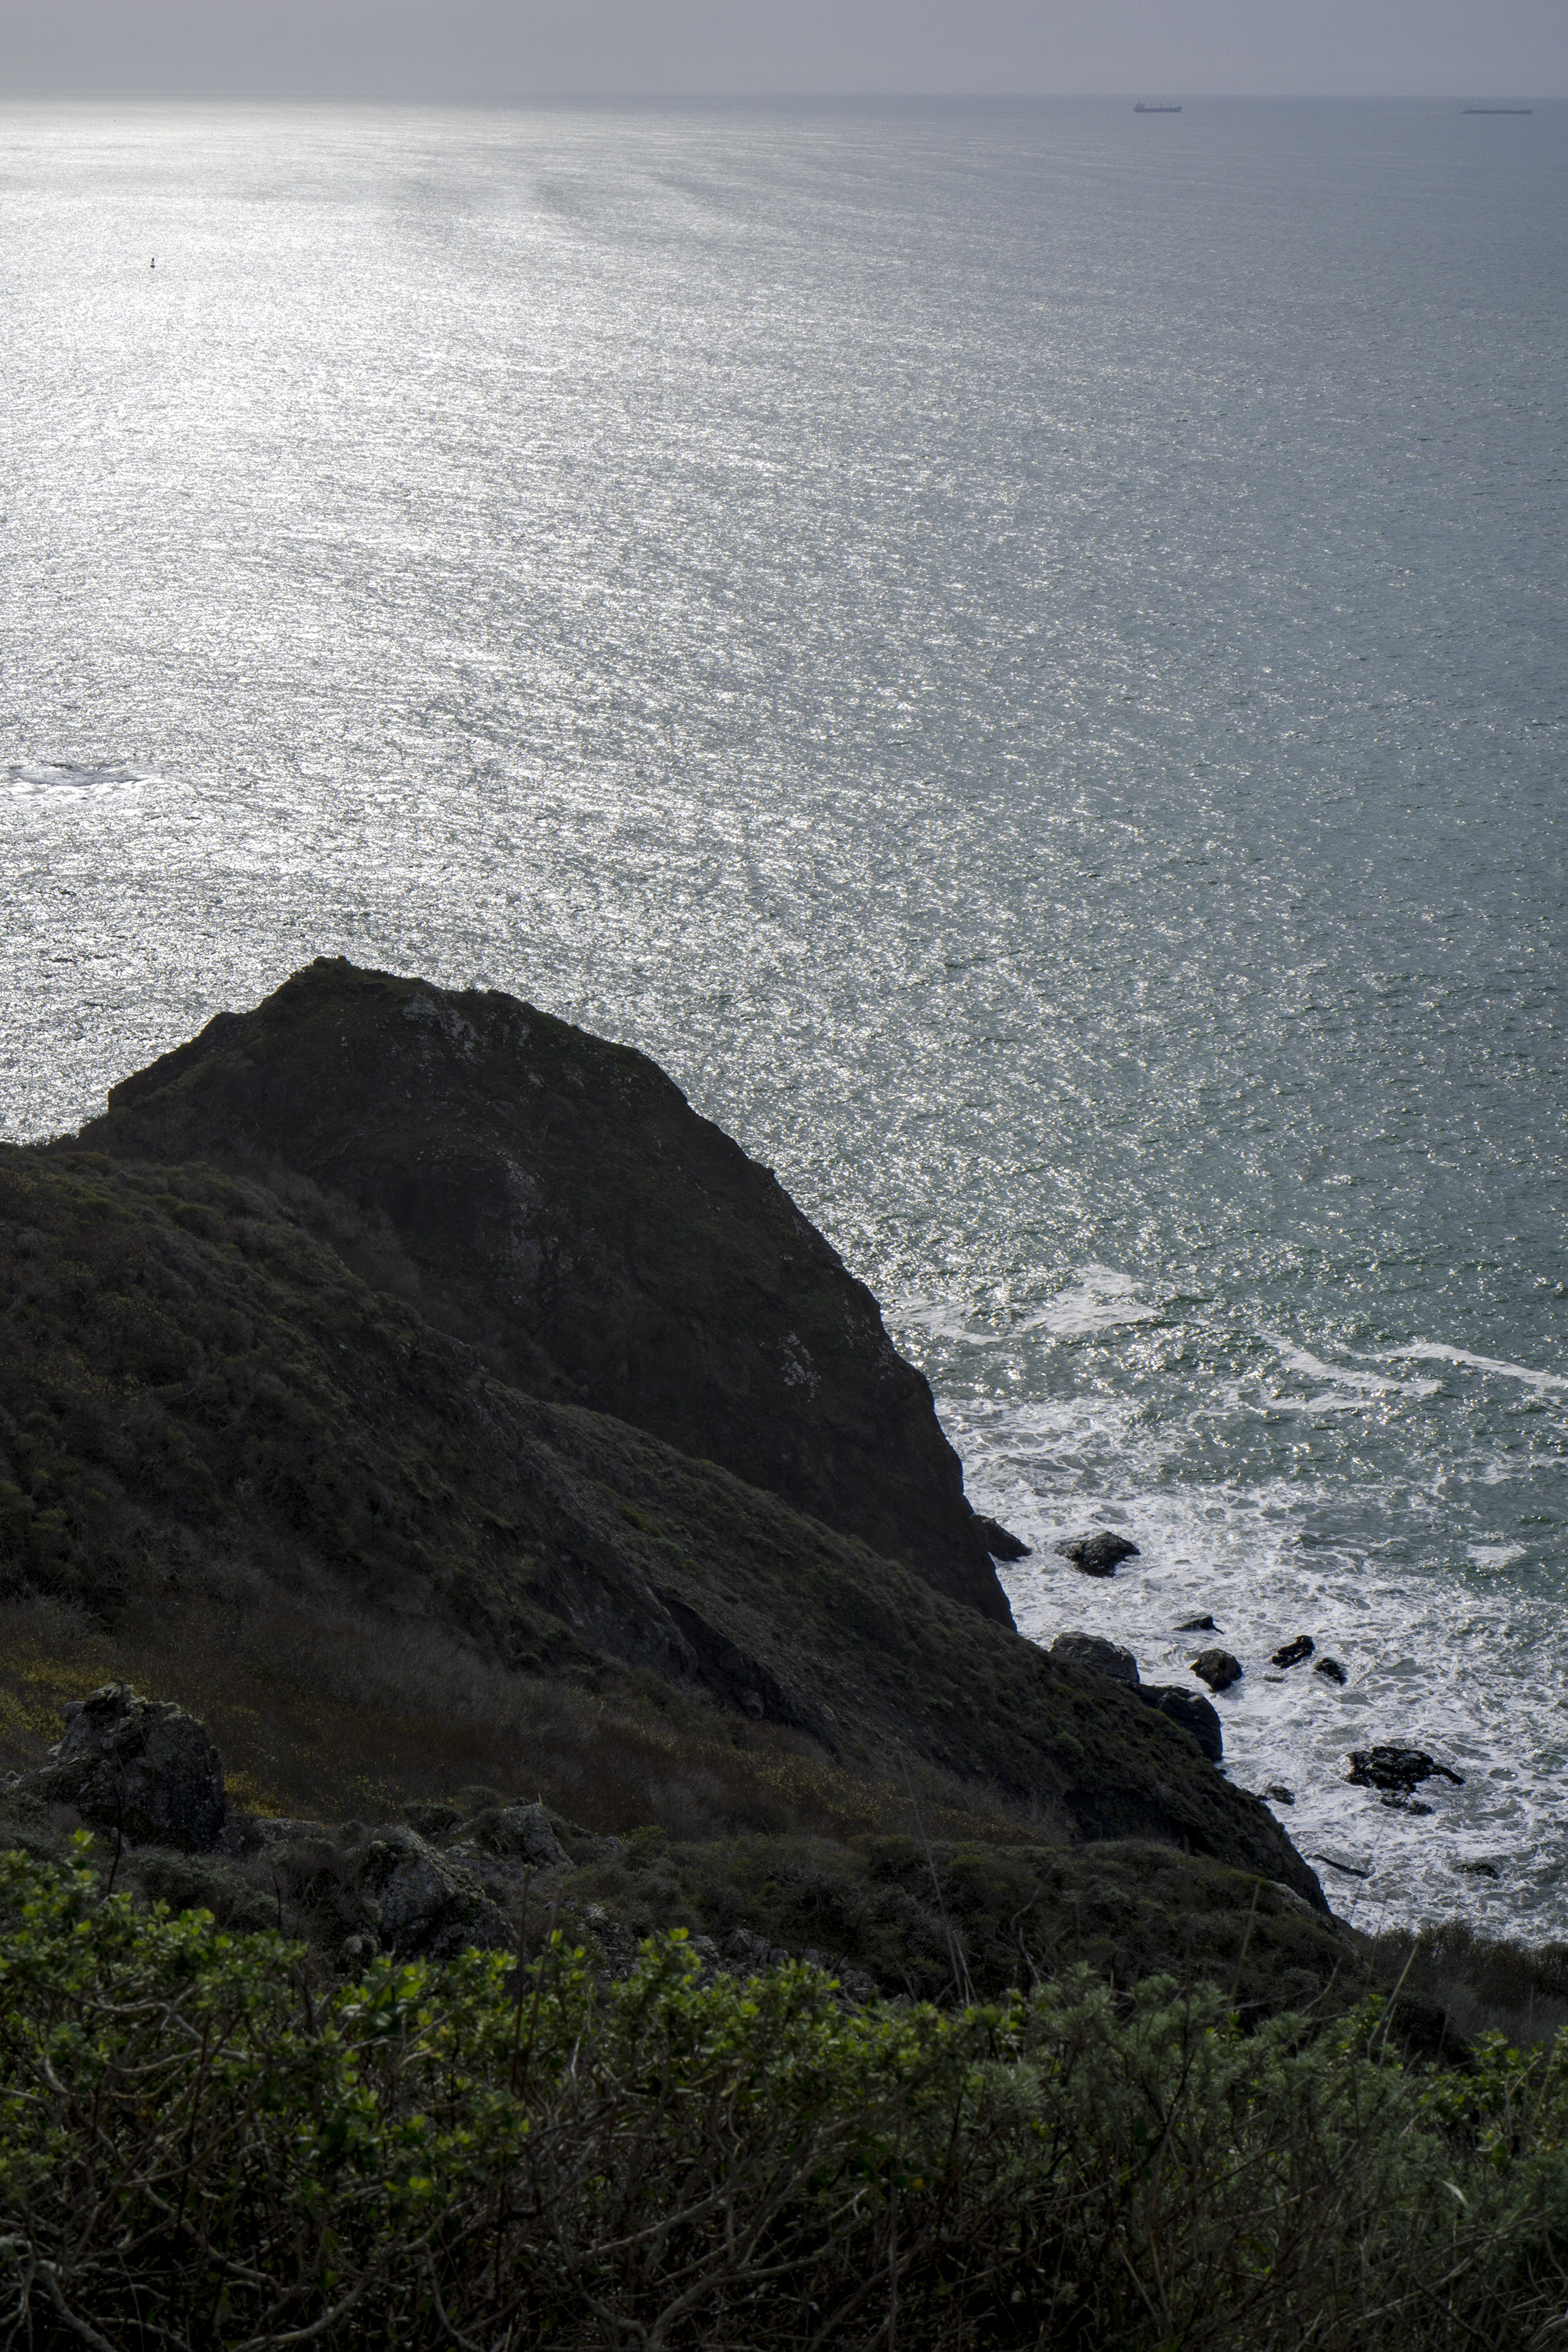 Pacific Ocean from Tennessee Valley Trail, Marin Headlands, Golden Gate National Recreation Area / Darker than Green